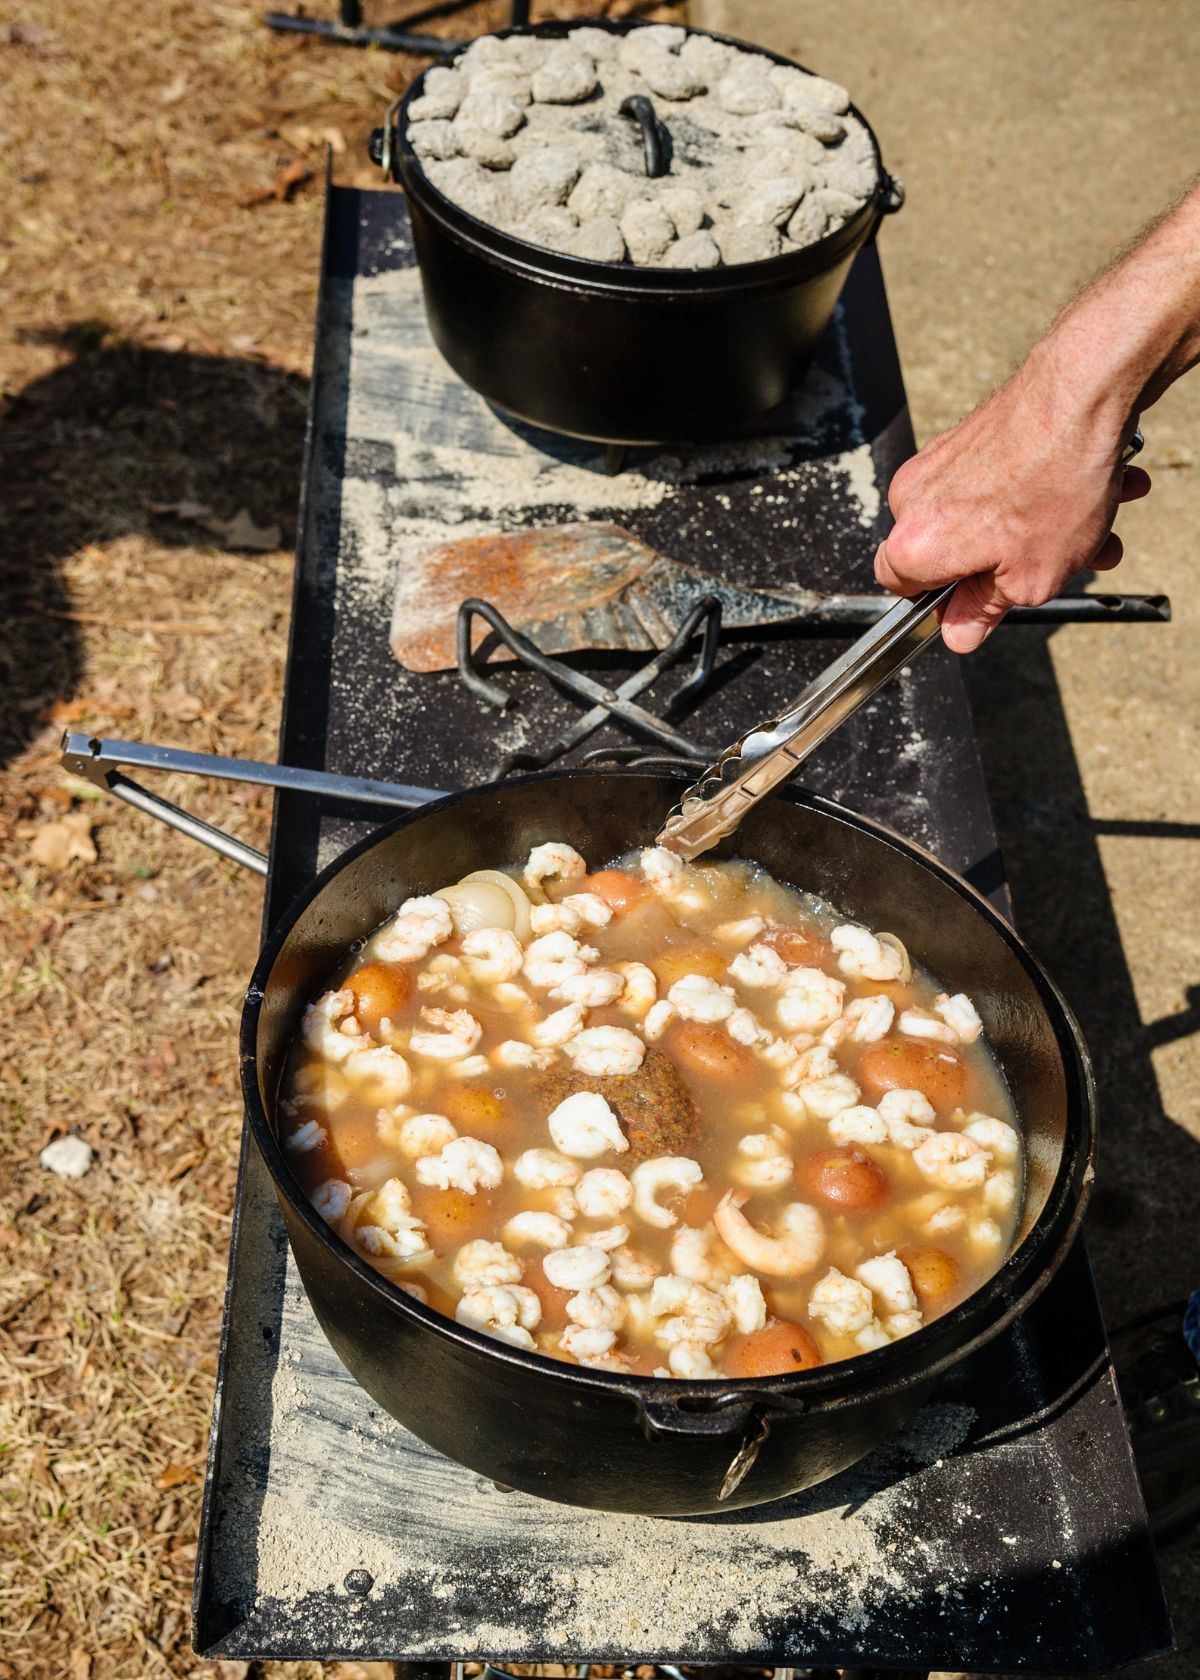 Best Dutch Oven for Camping